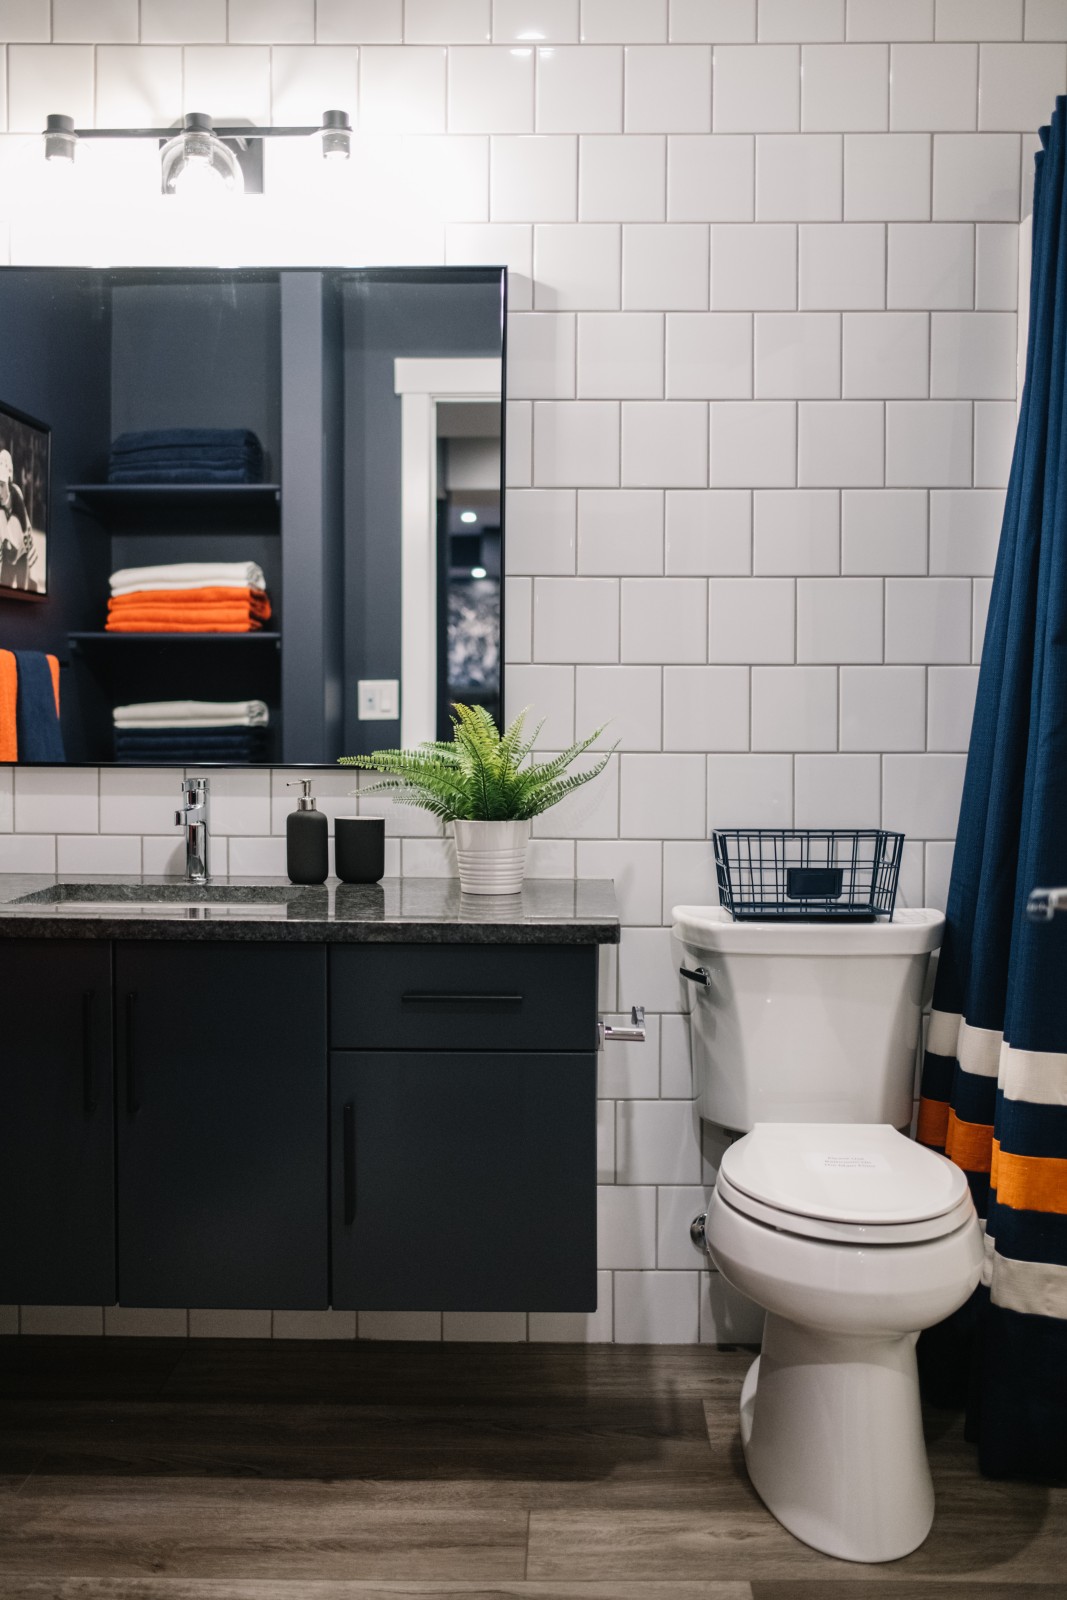 Oilers Fan Cave bathroom with dark blue vanity and dark countertops and white tile from floor to ceiling behind the toilet